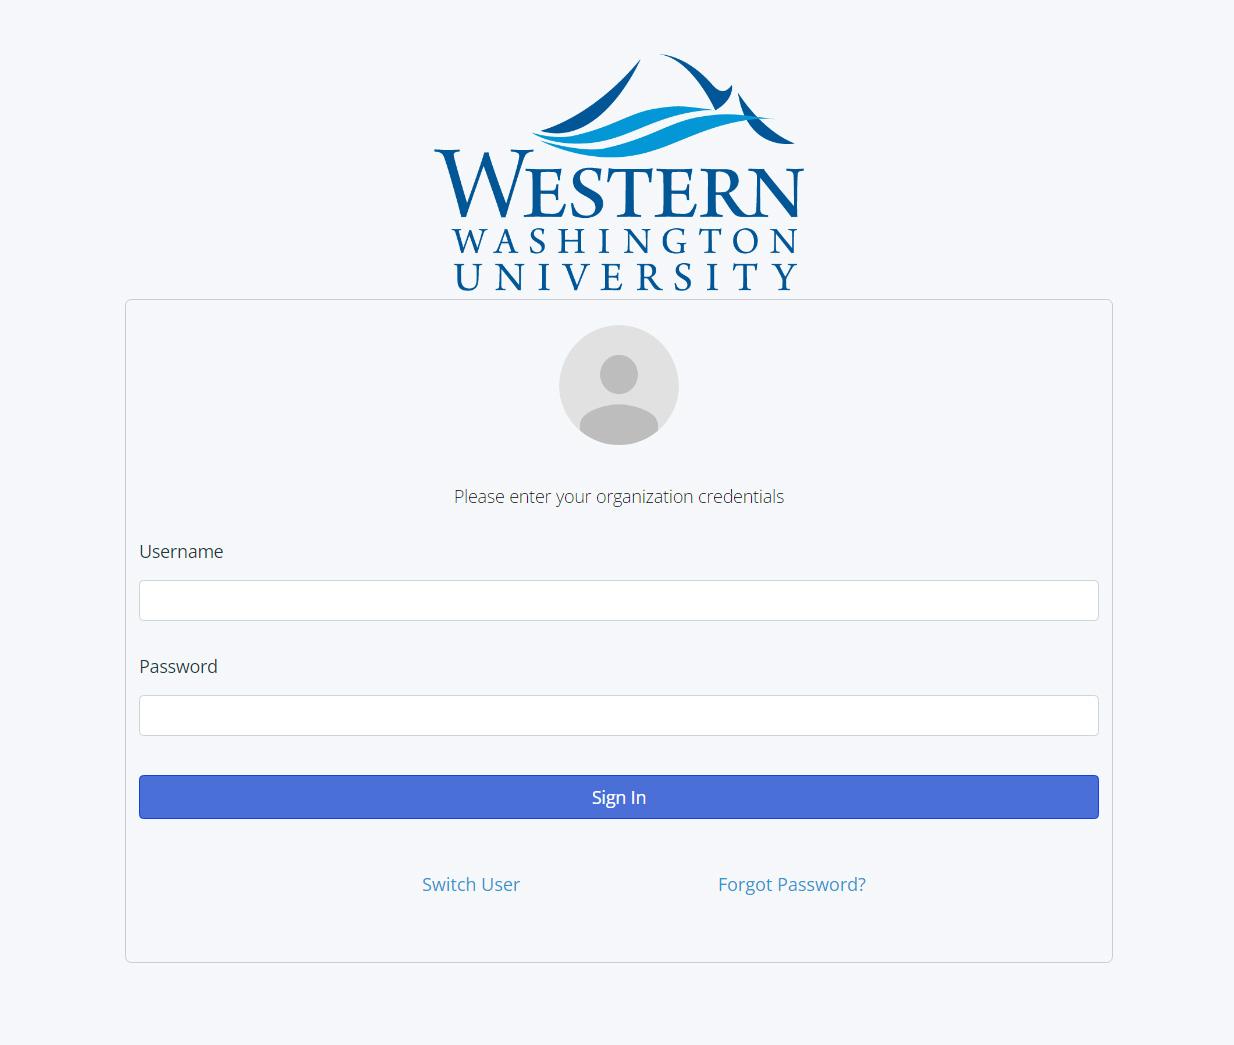 Registration screen requesting user name and password